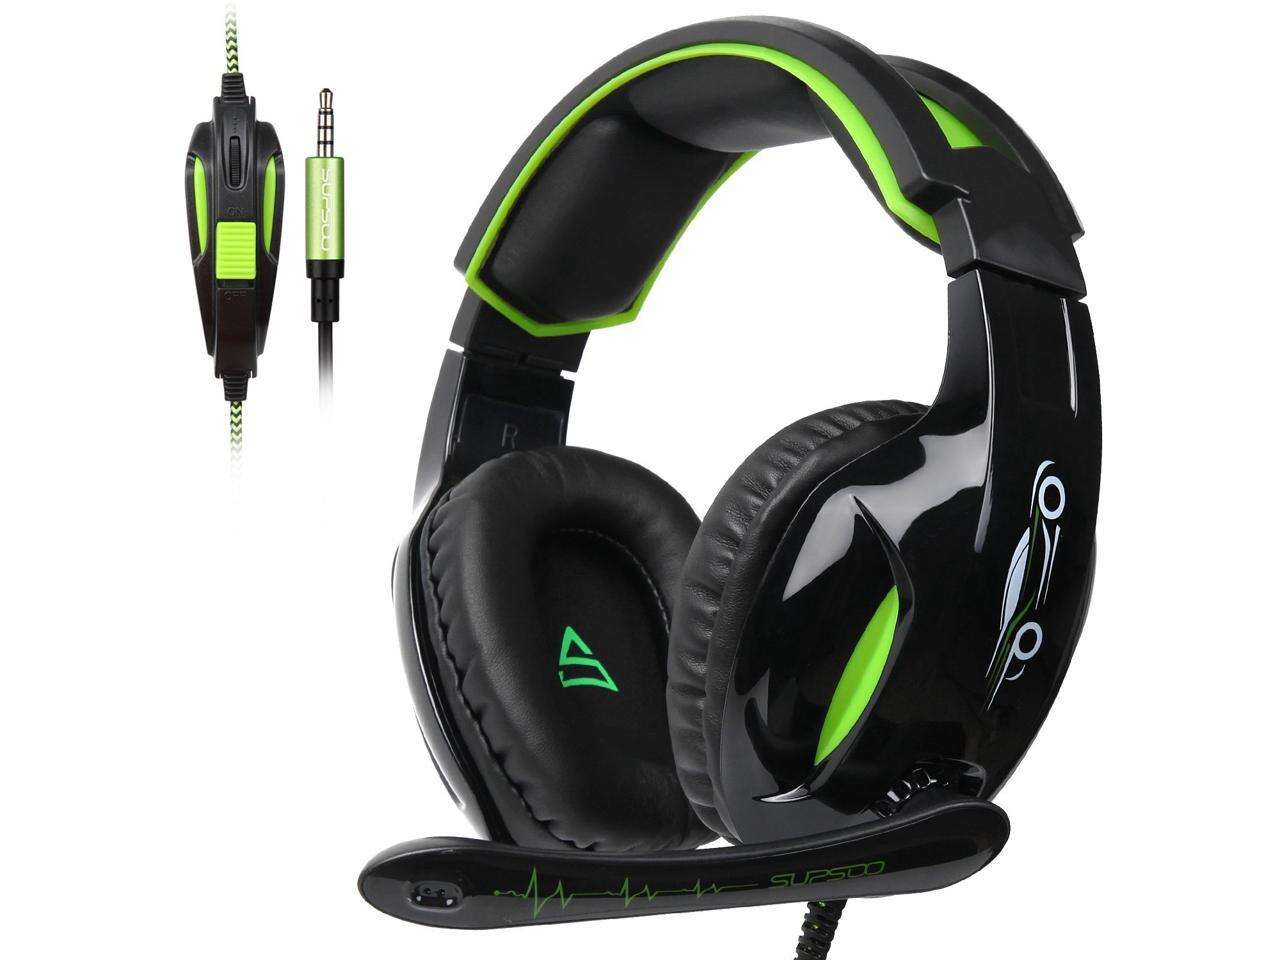 Supsoo G813 Stereo Bass Surround Gaming Headset 3.5mm Wired Over-ear Headphone with Mic Volume Control